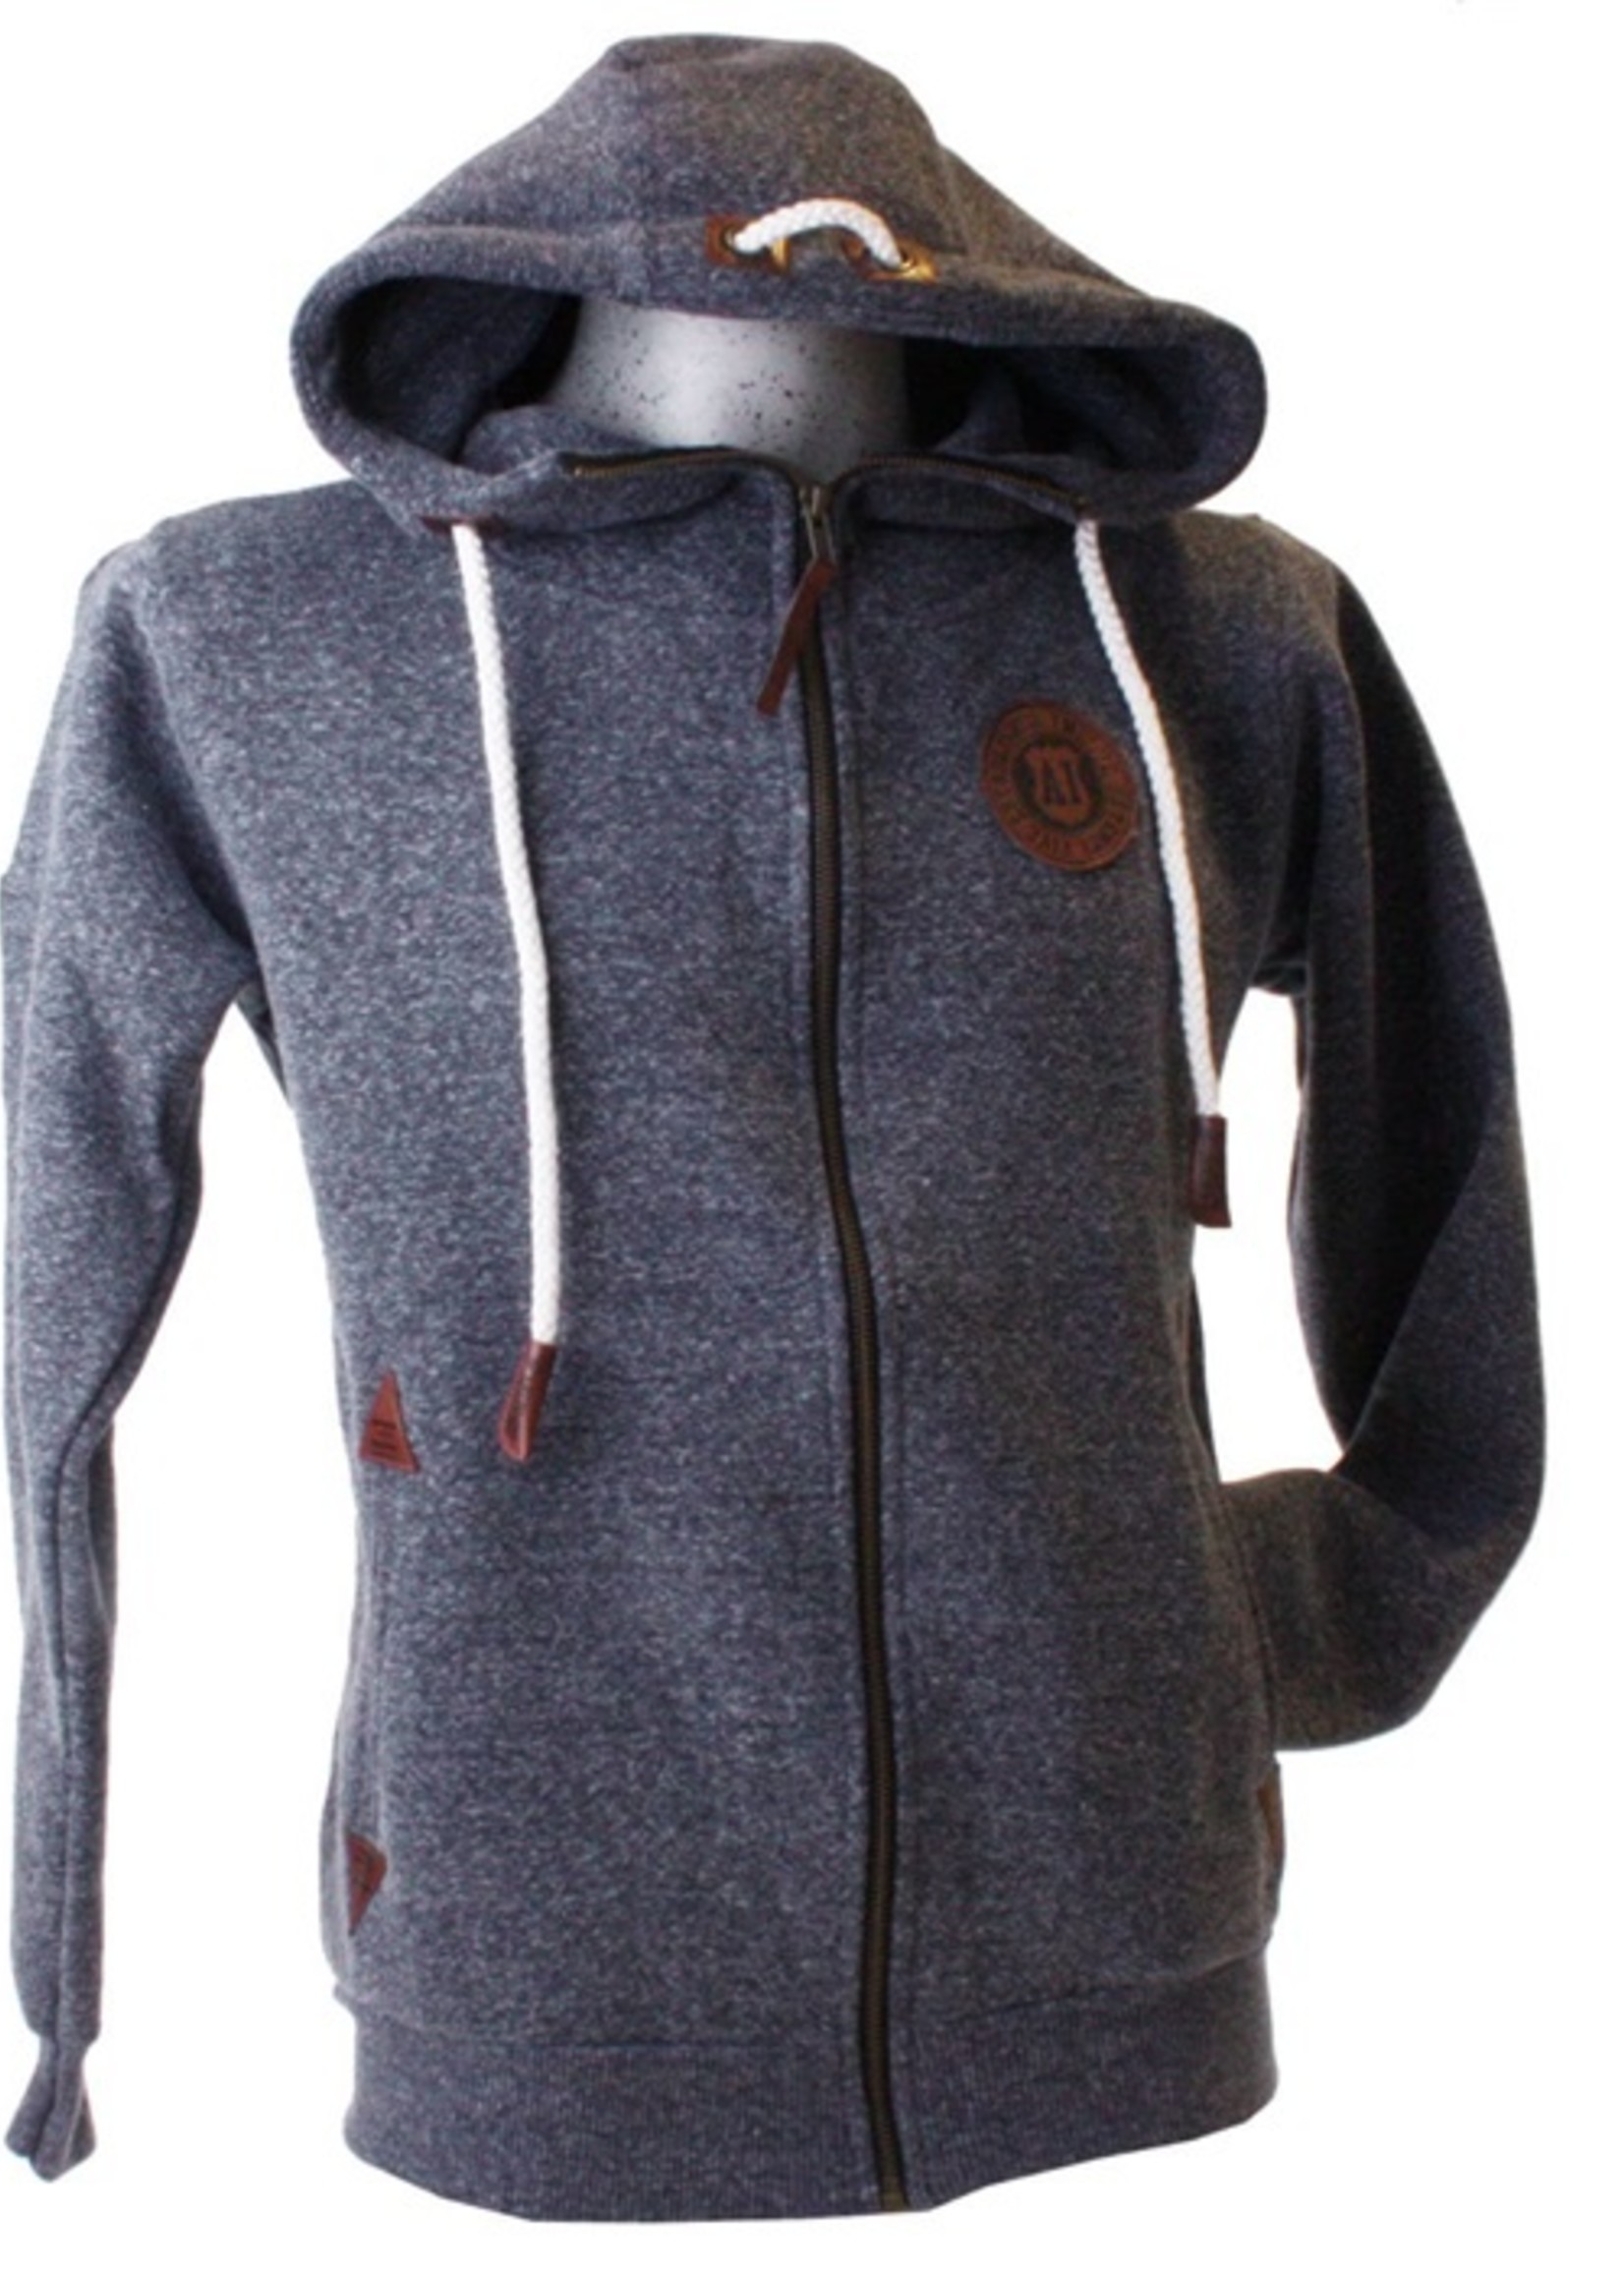 Hoodie with zipper Grey and leather badges